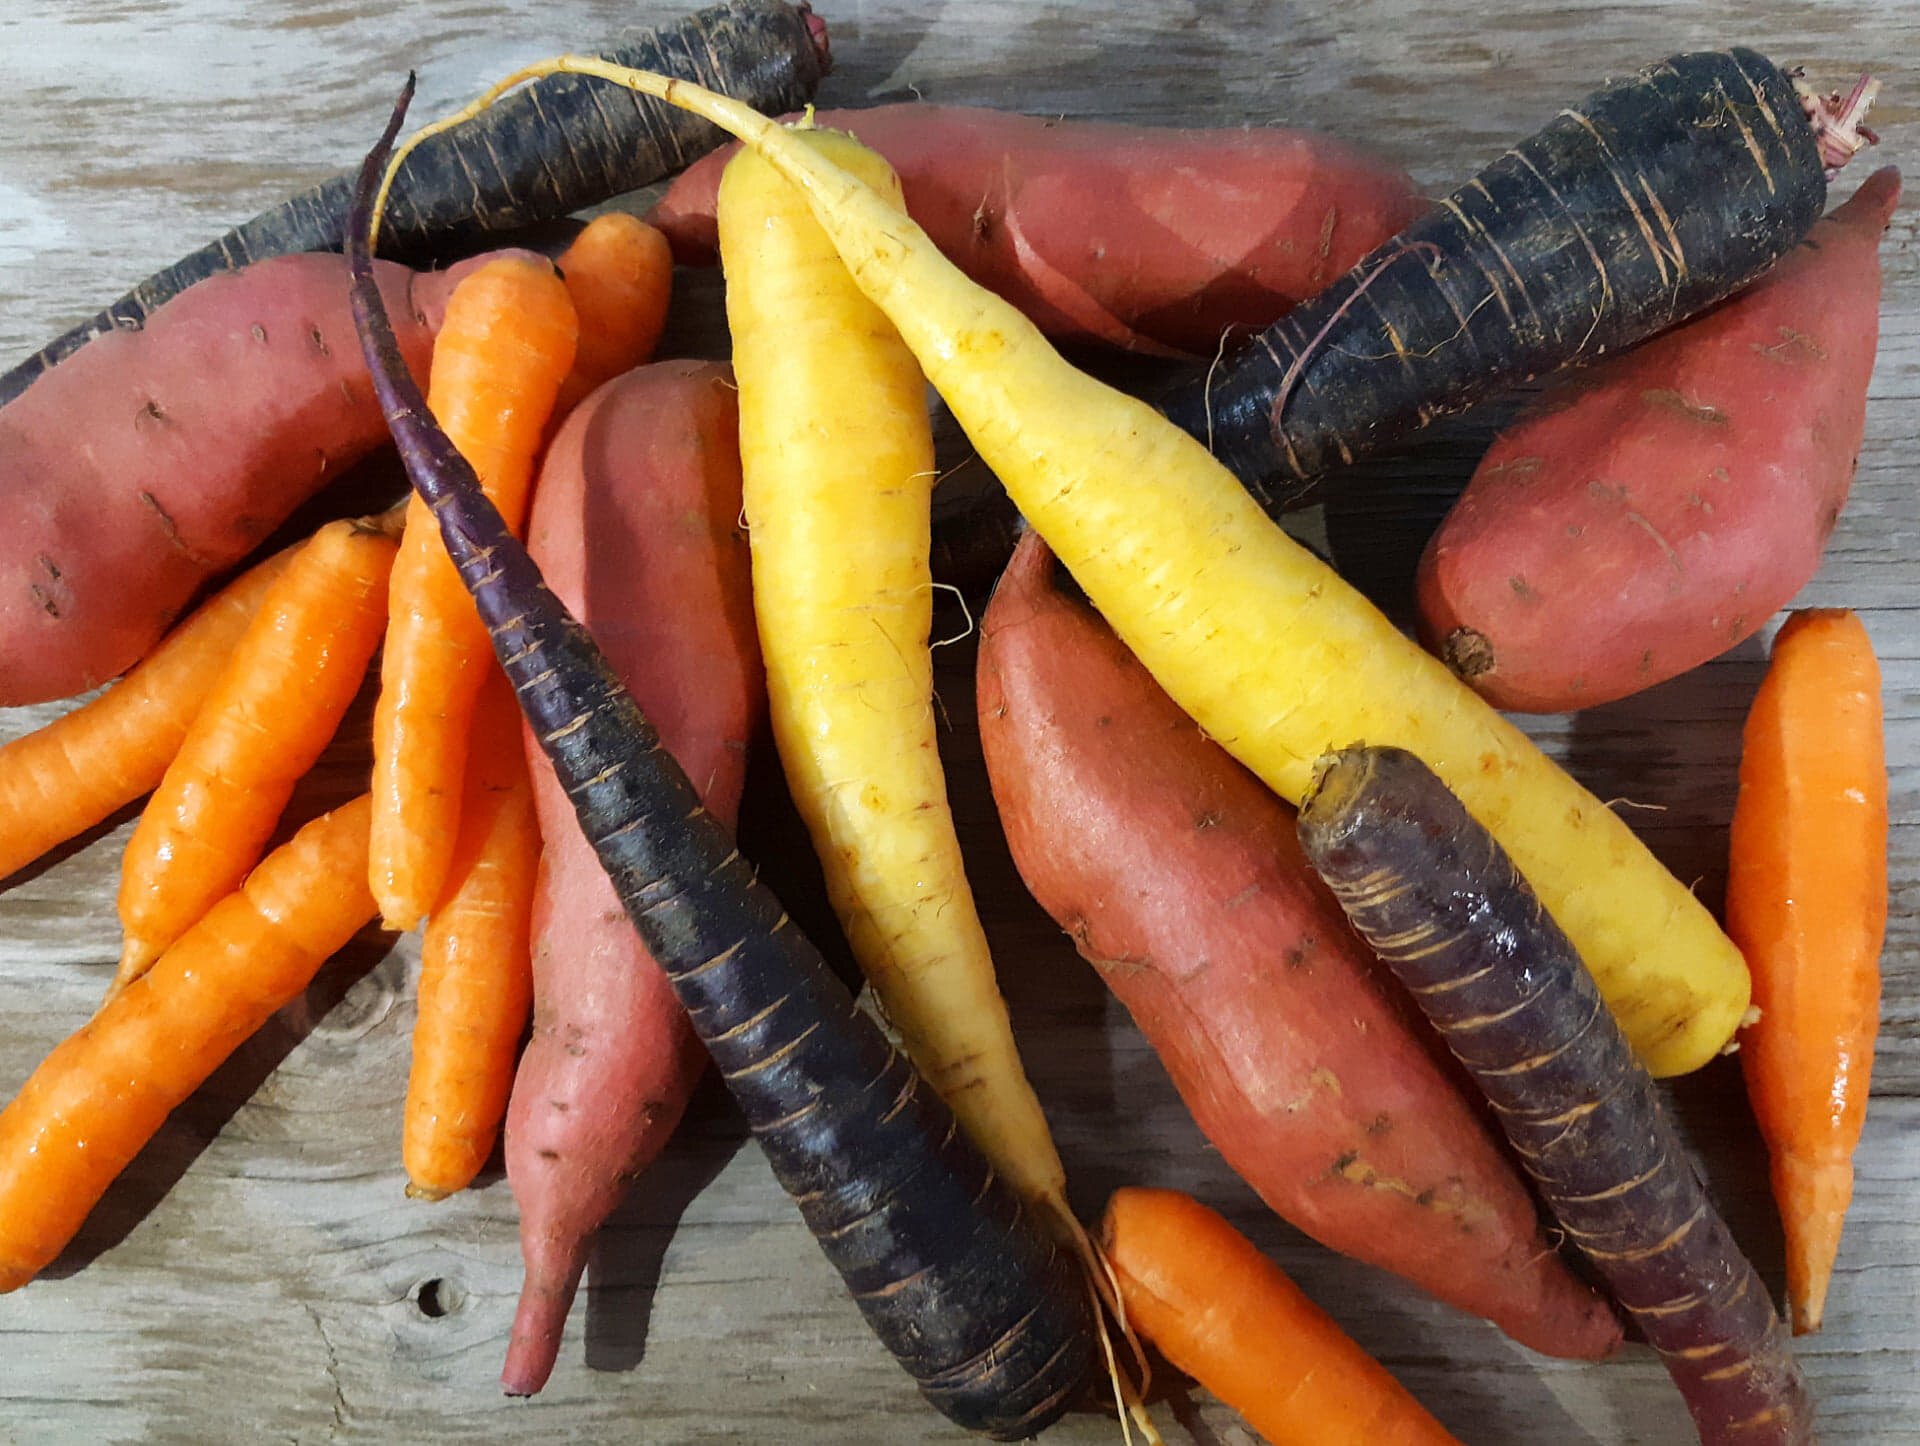 A pile of rainbow-colored carrots